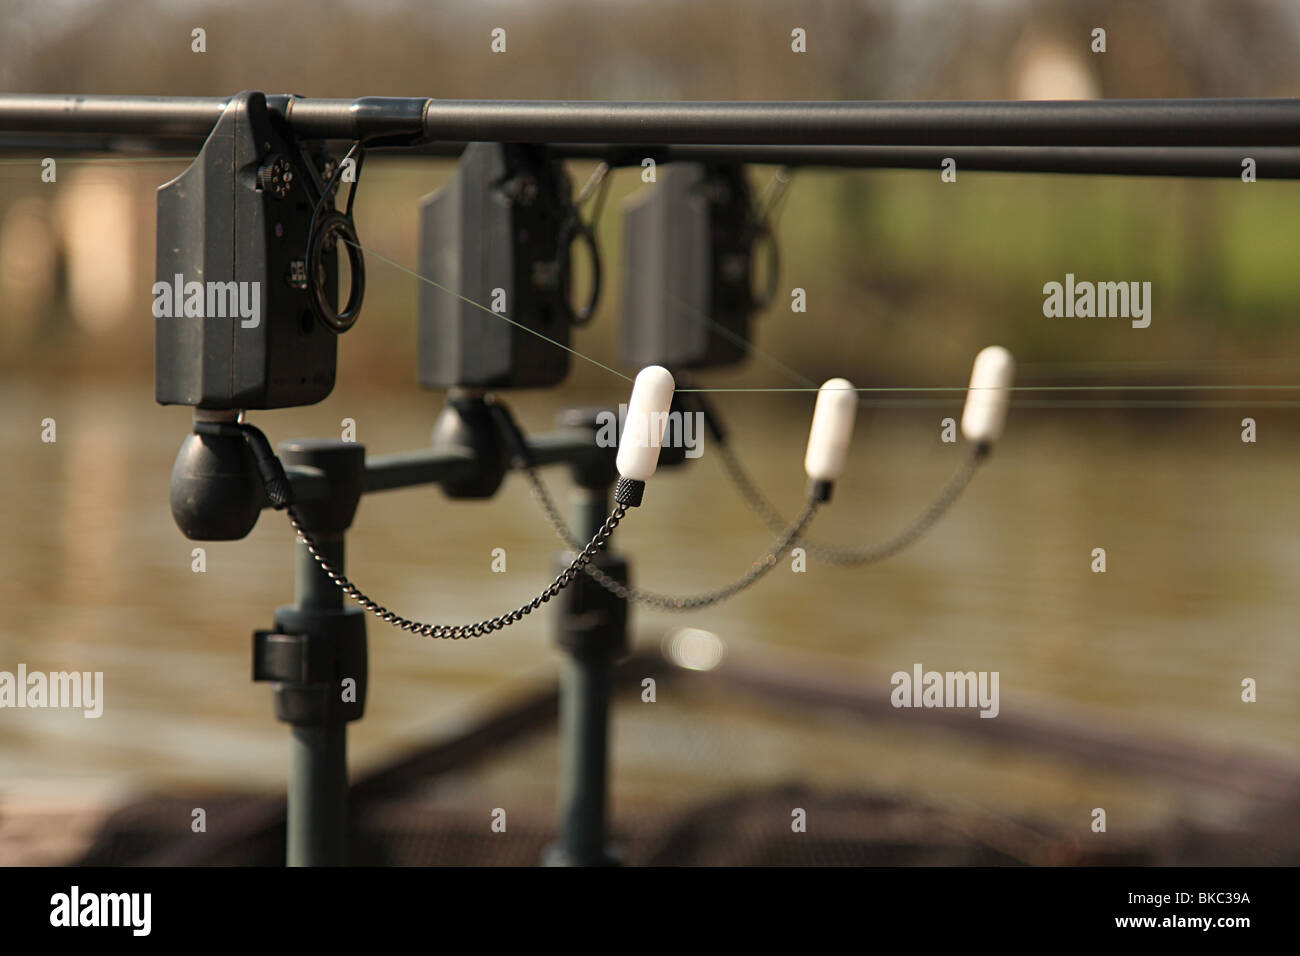 A carp fishing set-up. Three rods on a rod pod with the swingers